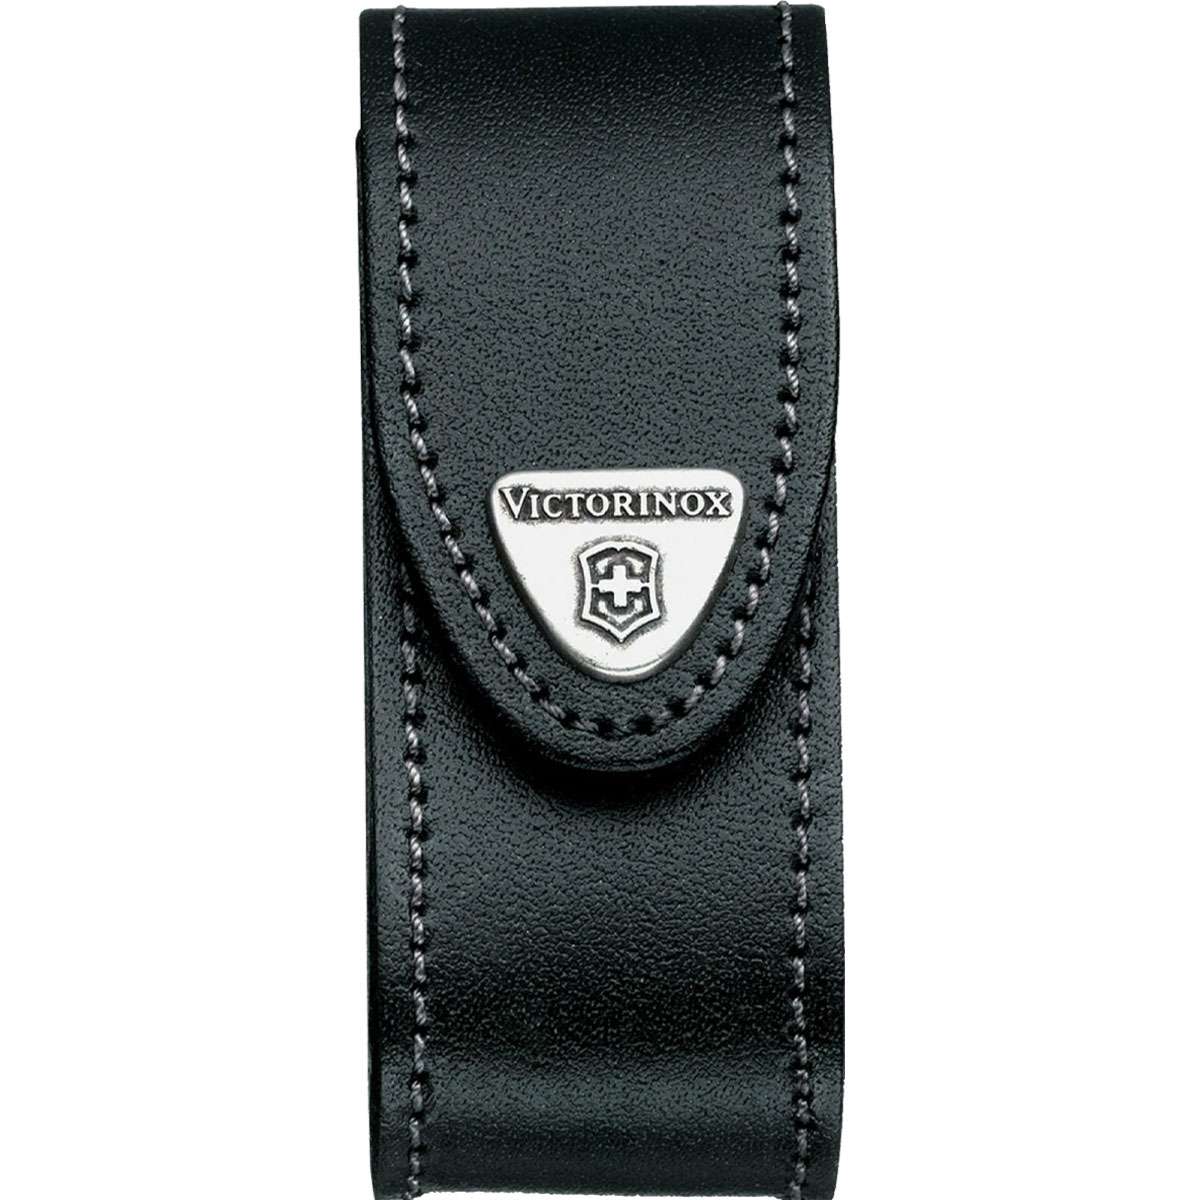 Victorinox Leather Pouch 98mm - Black